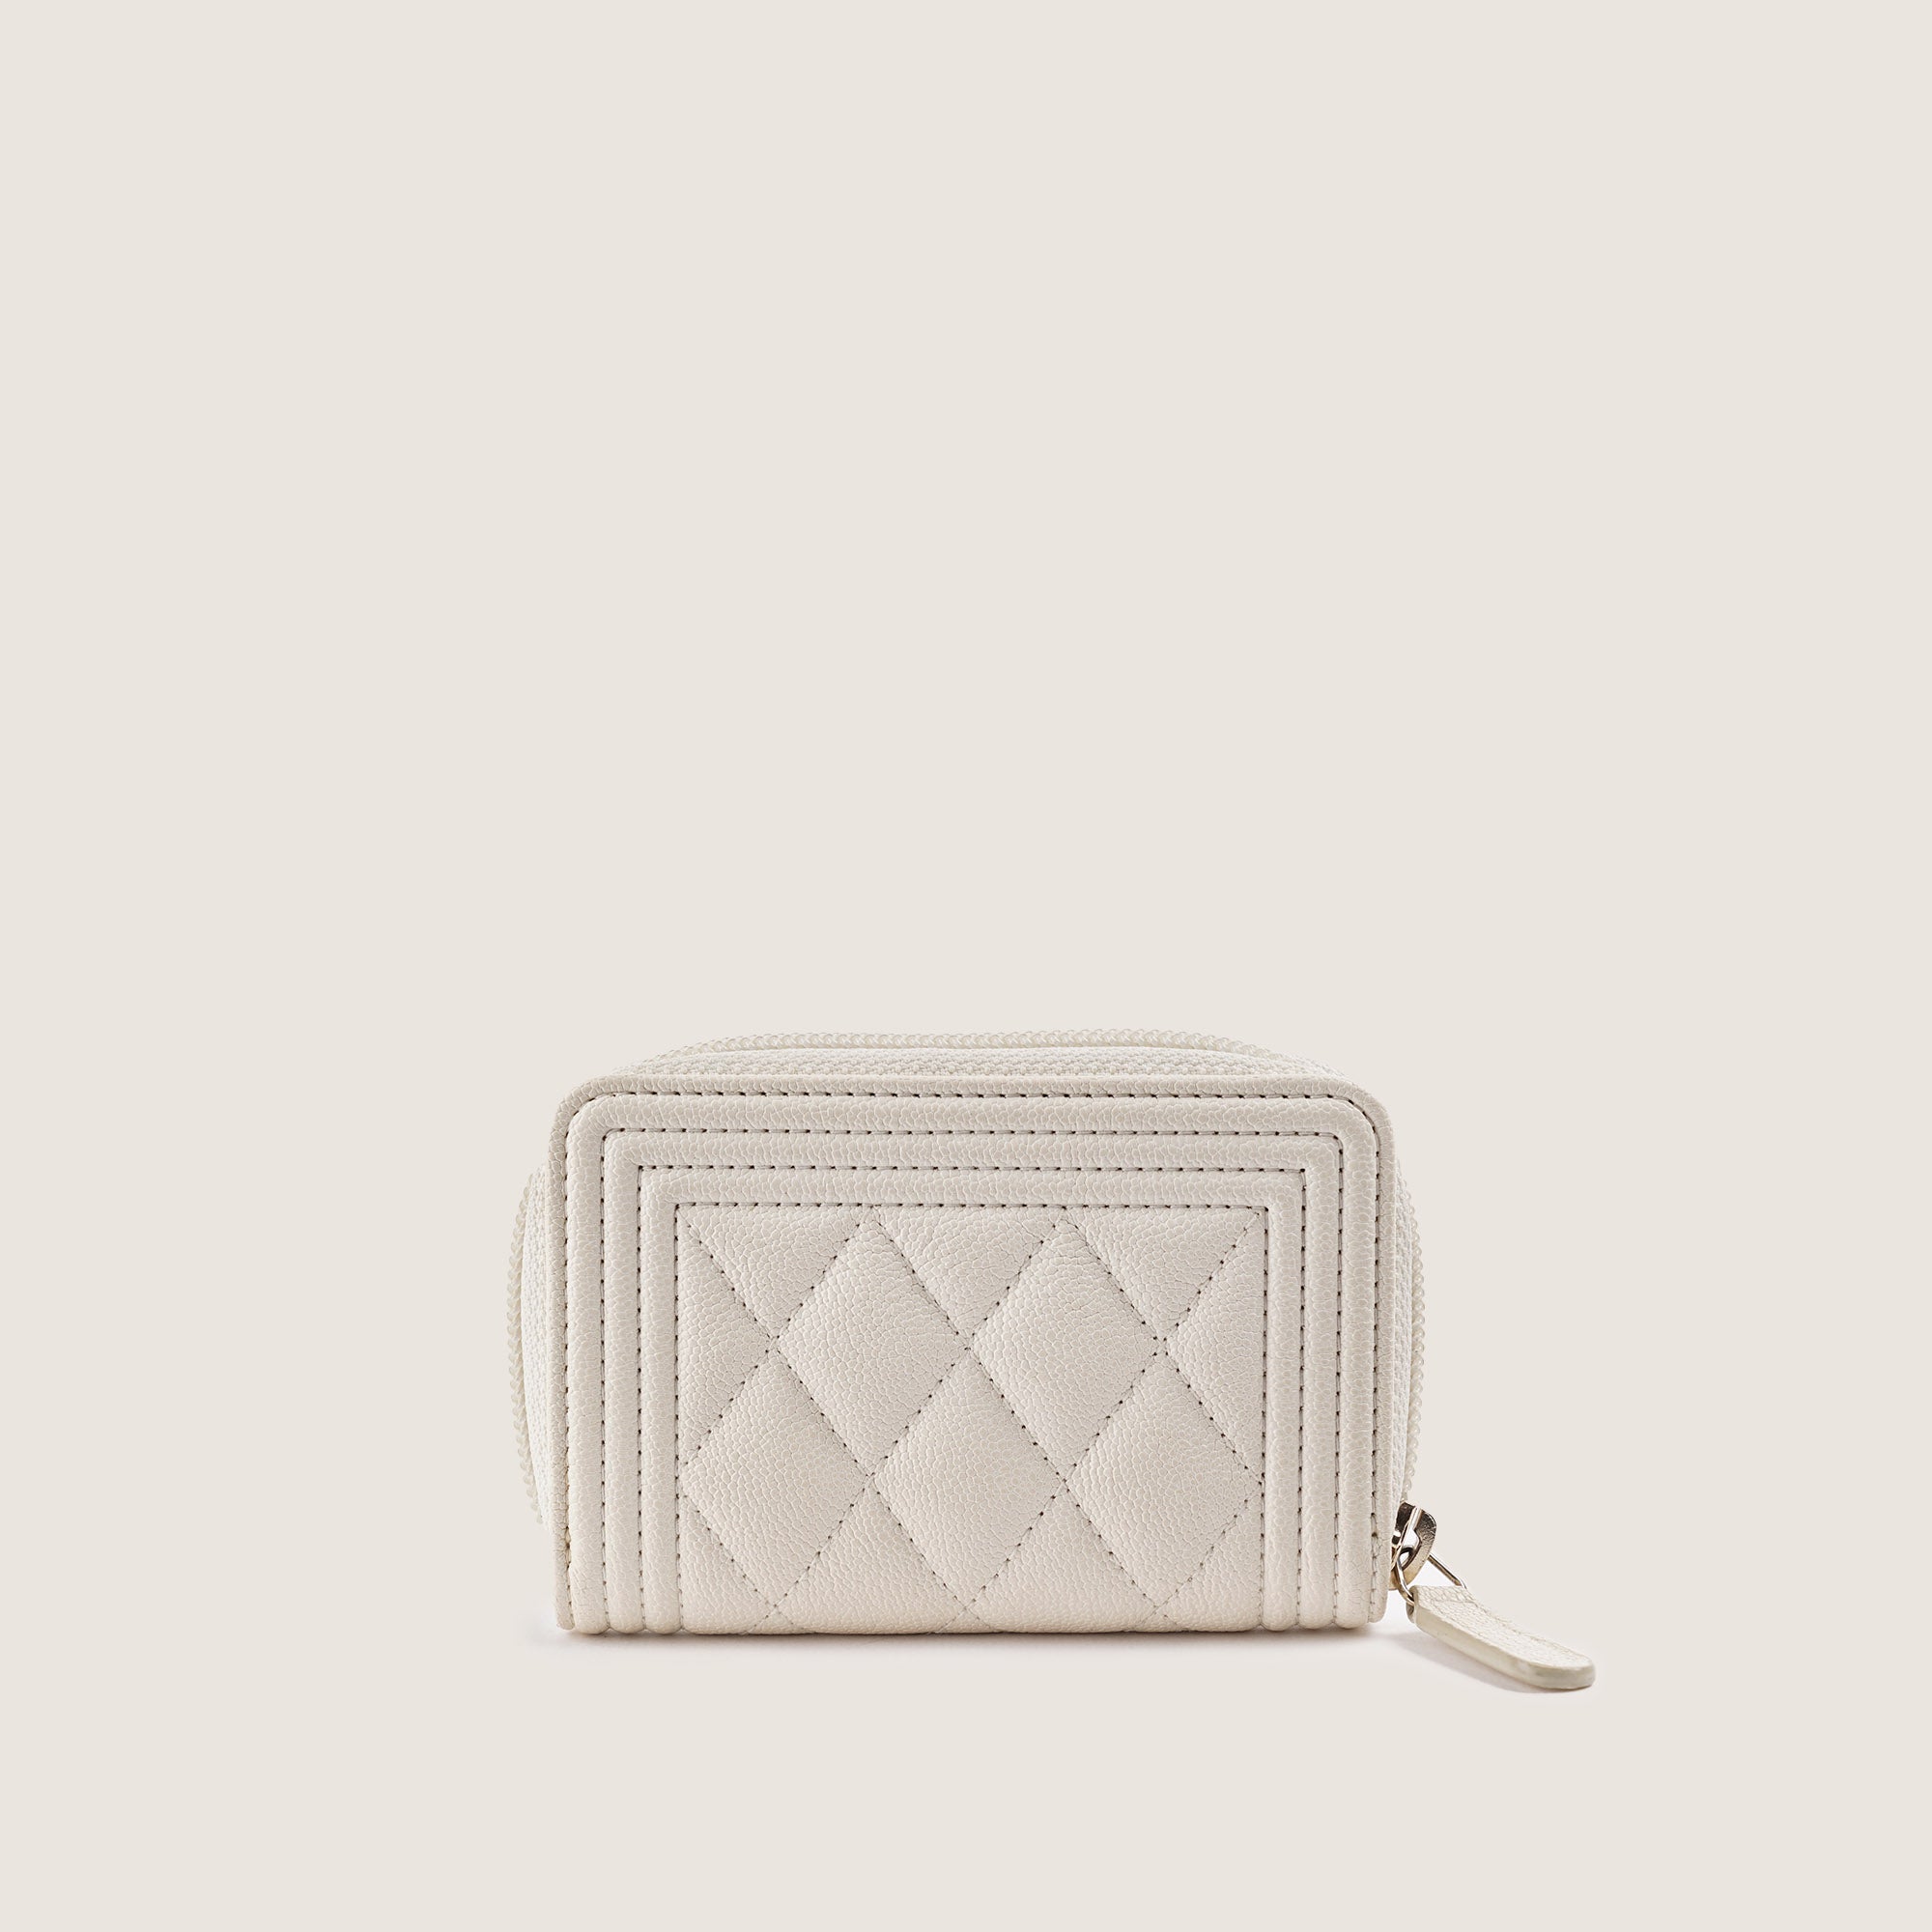 Boy Zip Around Coin Purse - CHANEL - Affordable Luxury image